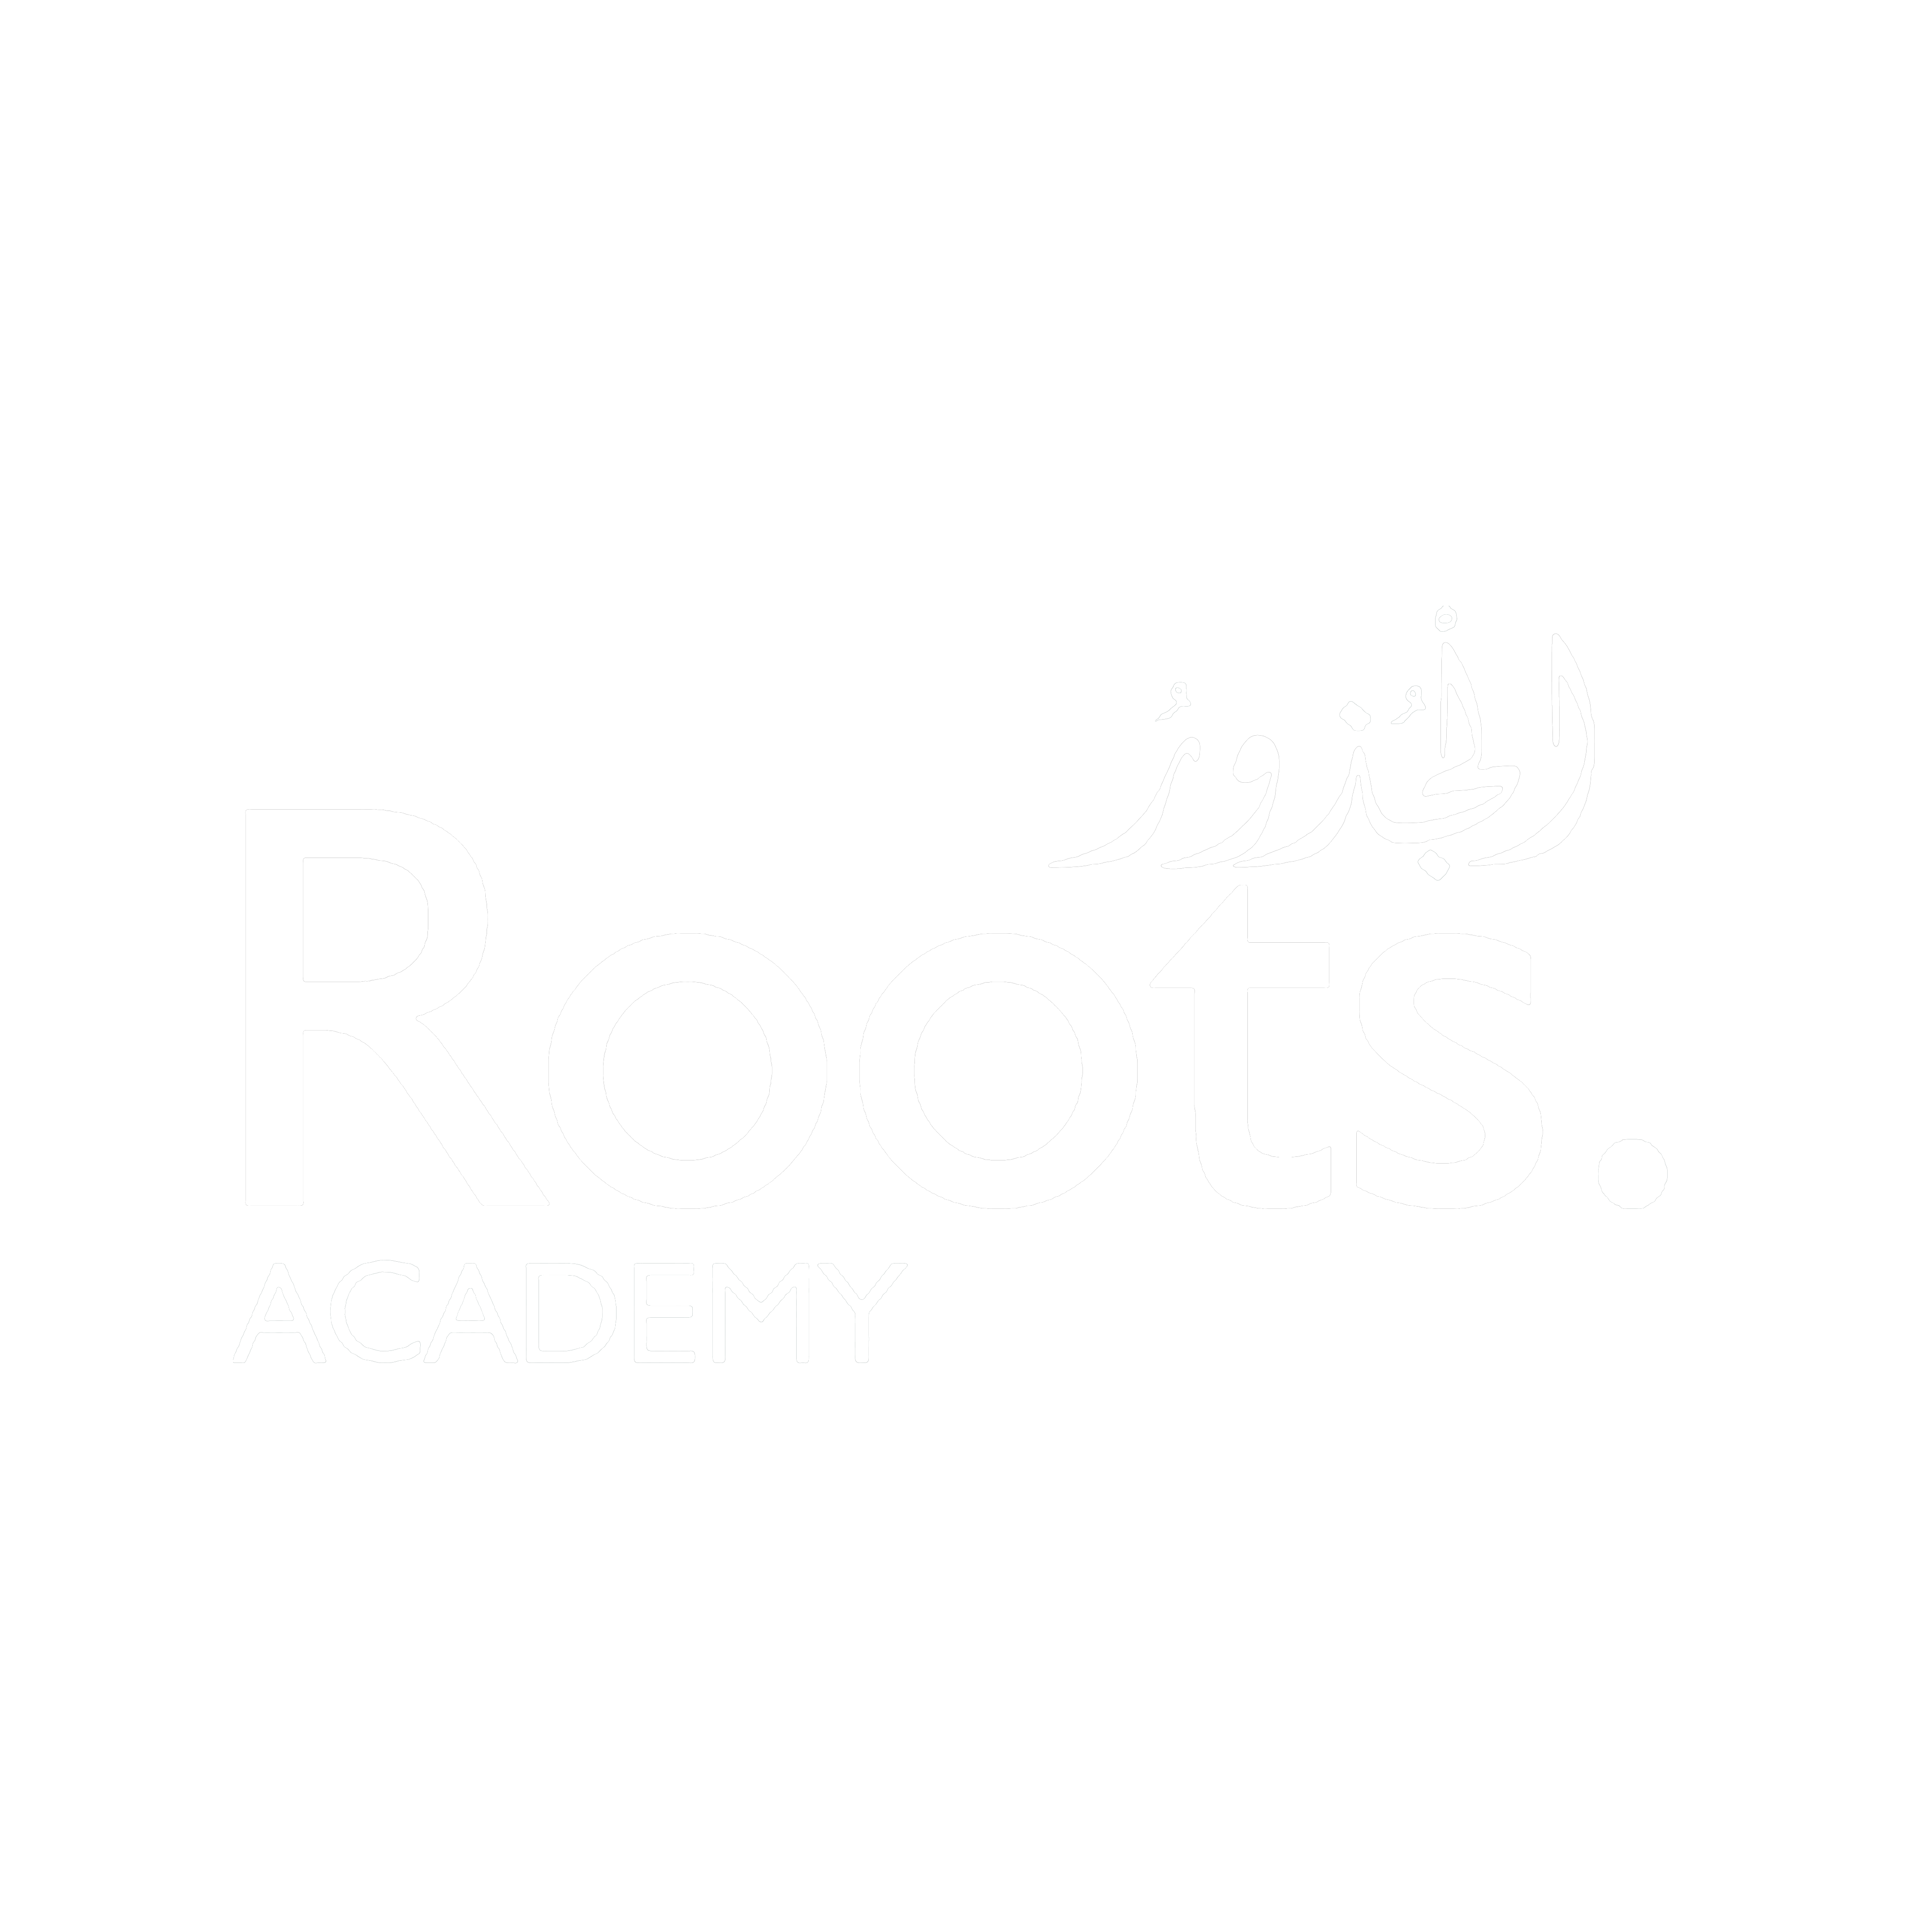 Roots-Final-Logo-WHITE-Transparent.png